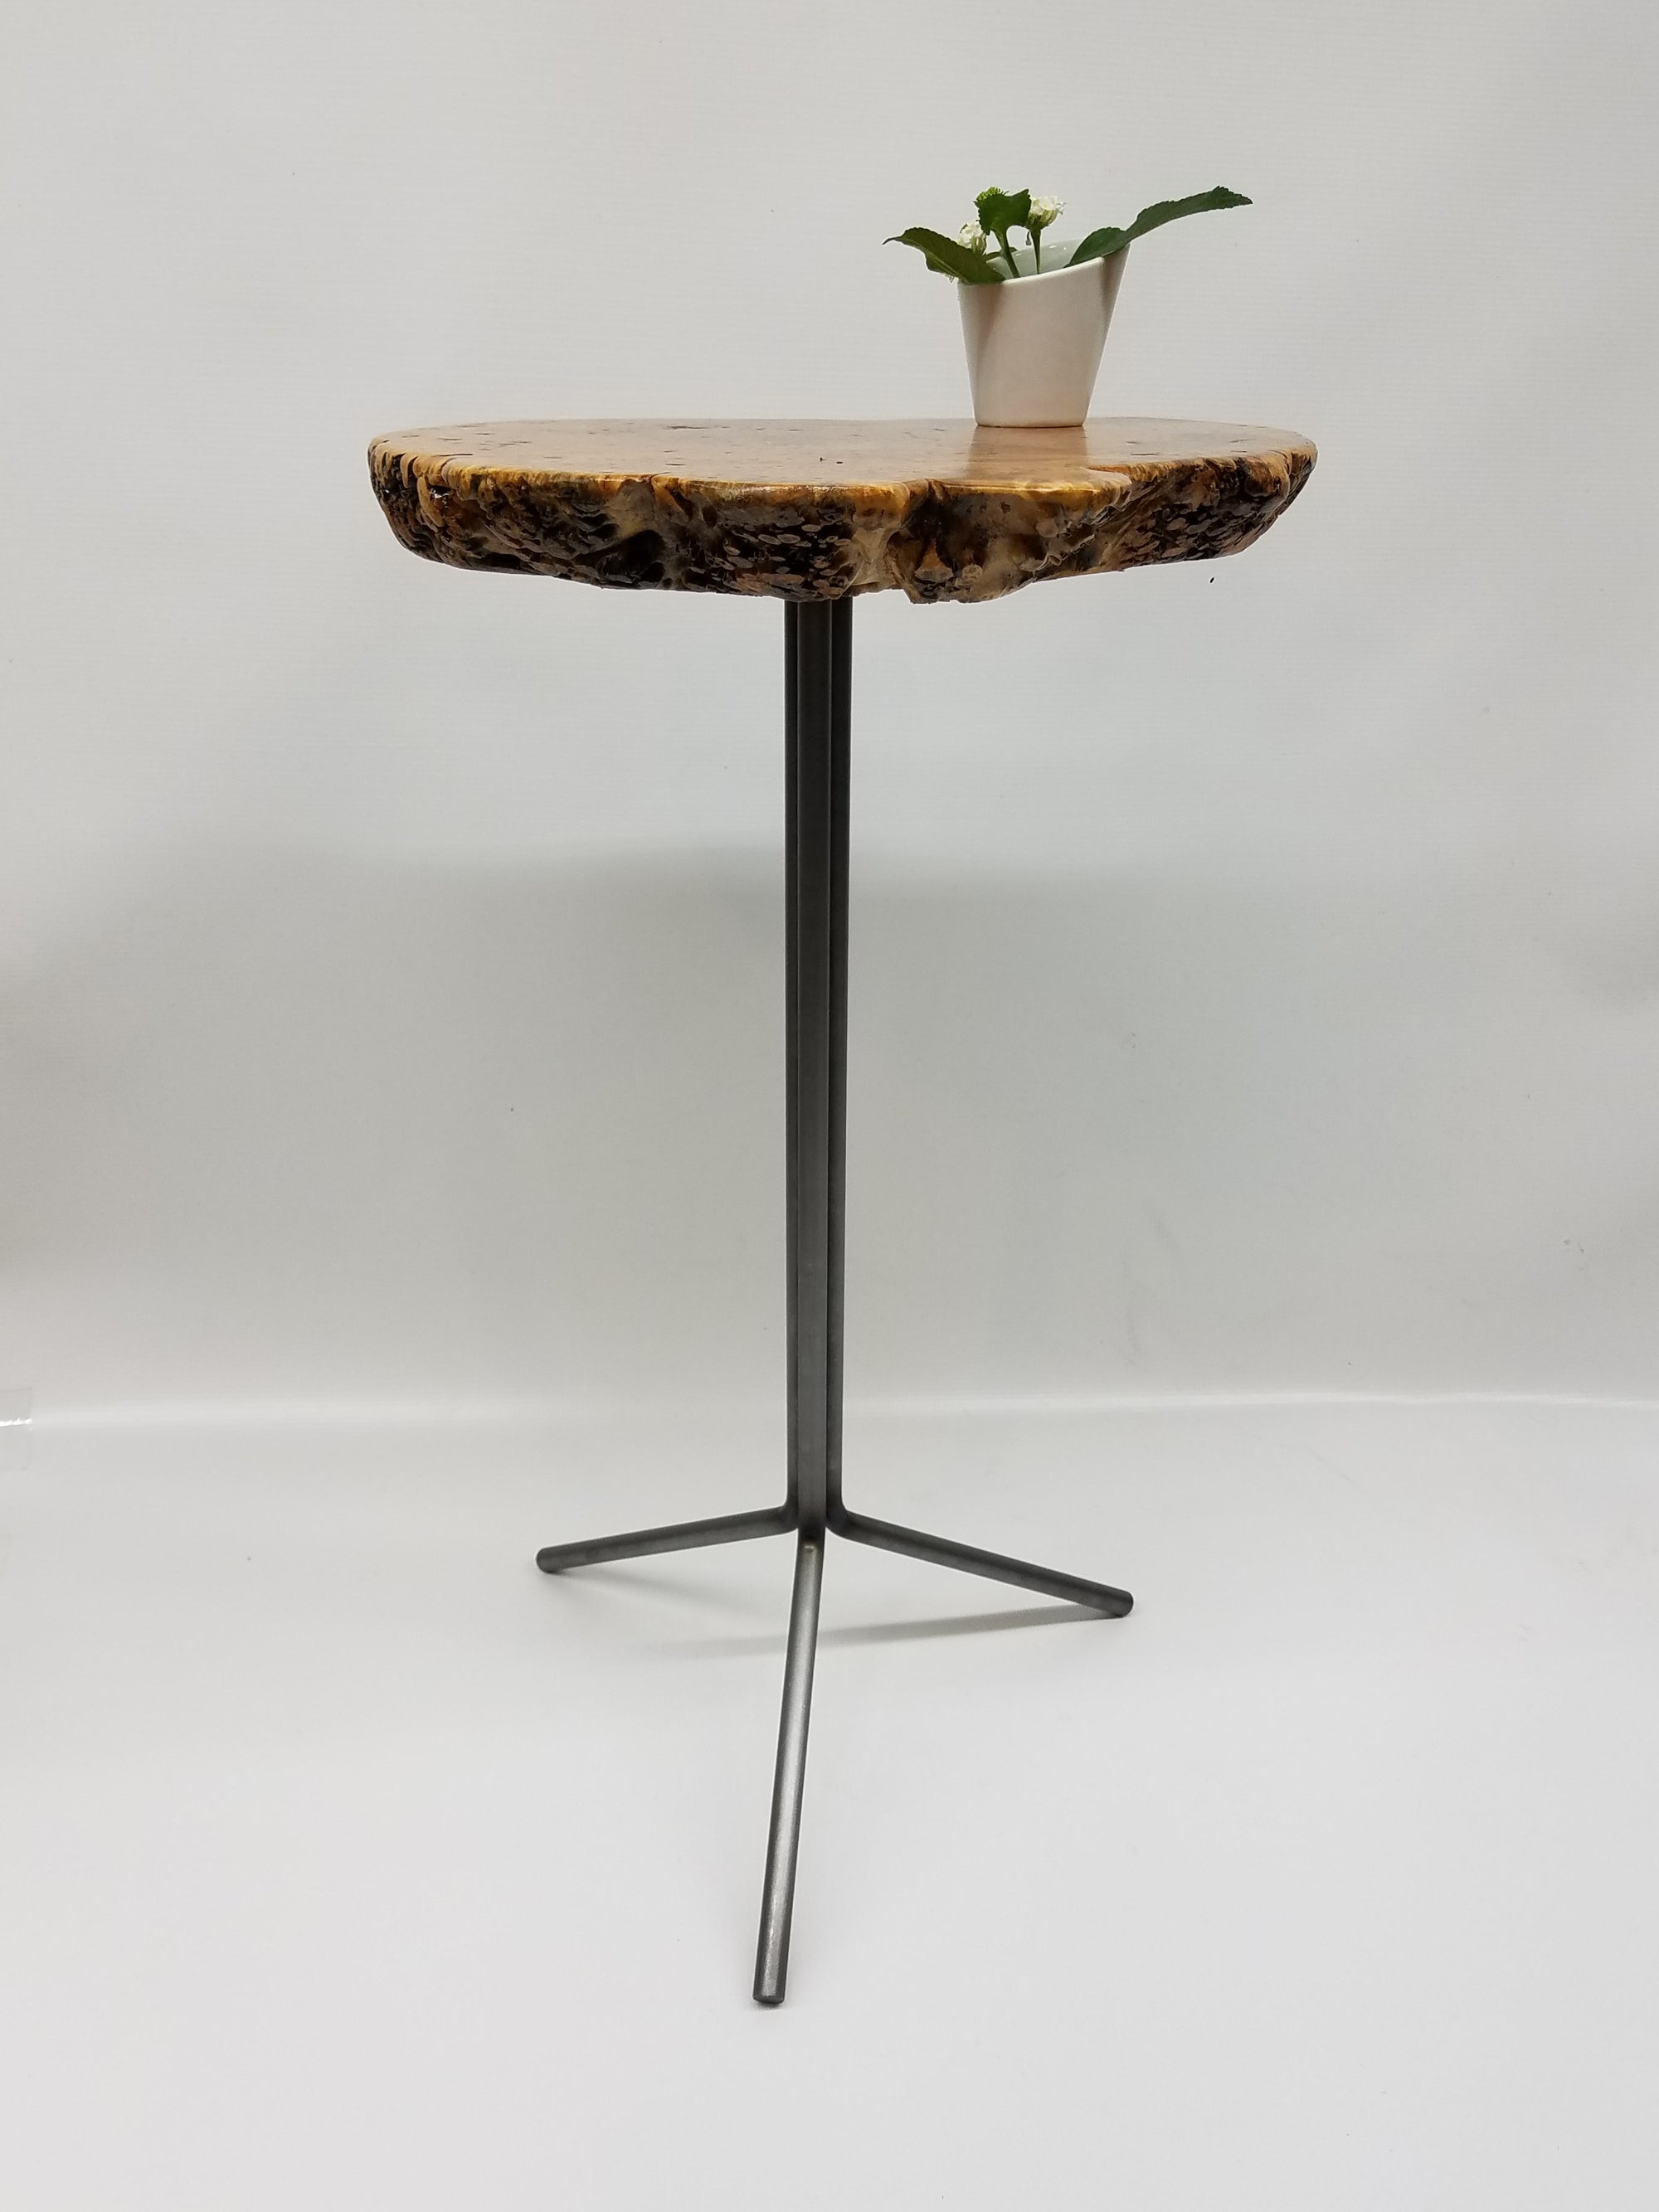 Spalted Maple Burl Side Table- End Table- Live Edge- Modern- Organic- Natural Wood- Light Wood- Figured Wood- Plant Stand- Unique Furniture